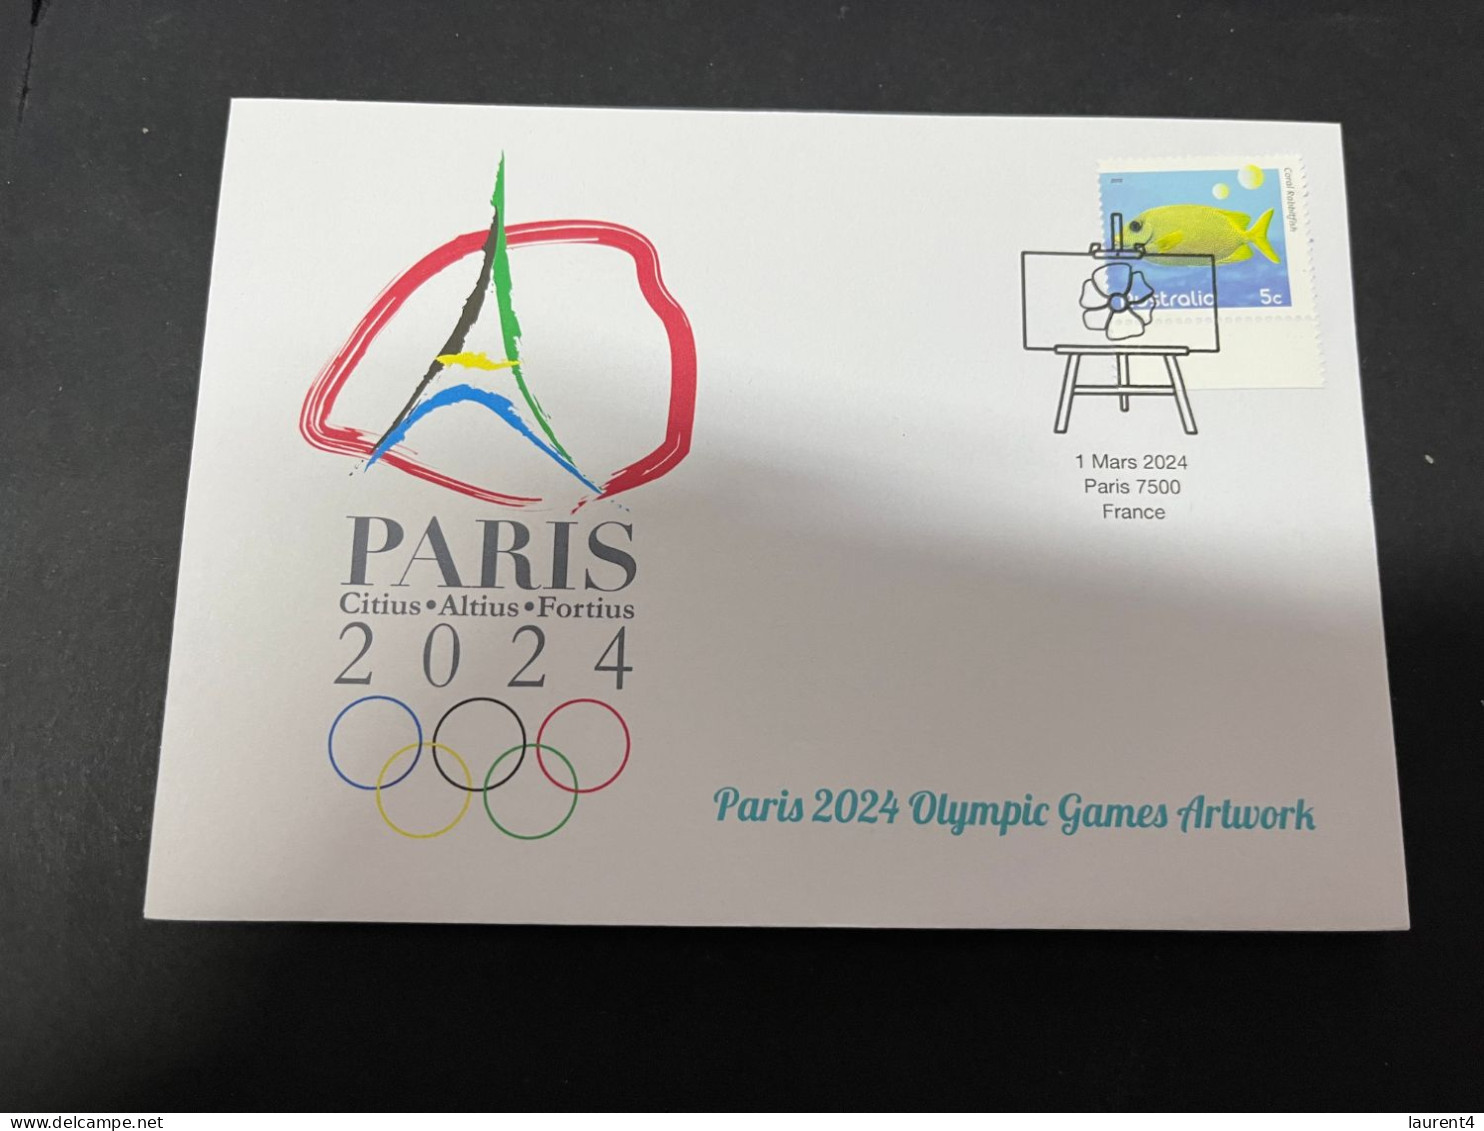 8-3-2024 (2 Y 30) Paris Olympic Games 2024 - 2 (of 12 Covers Series) For The Paris 2024 Olympic Games Artwork - Estate 2024 : Parigi